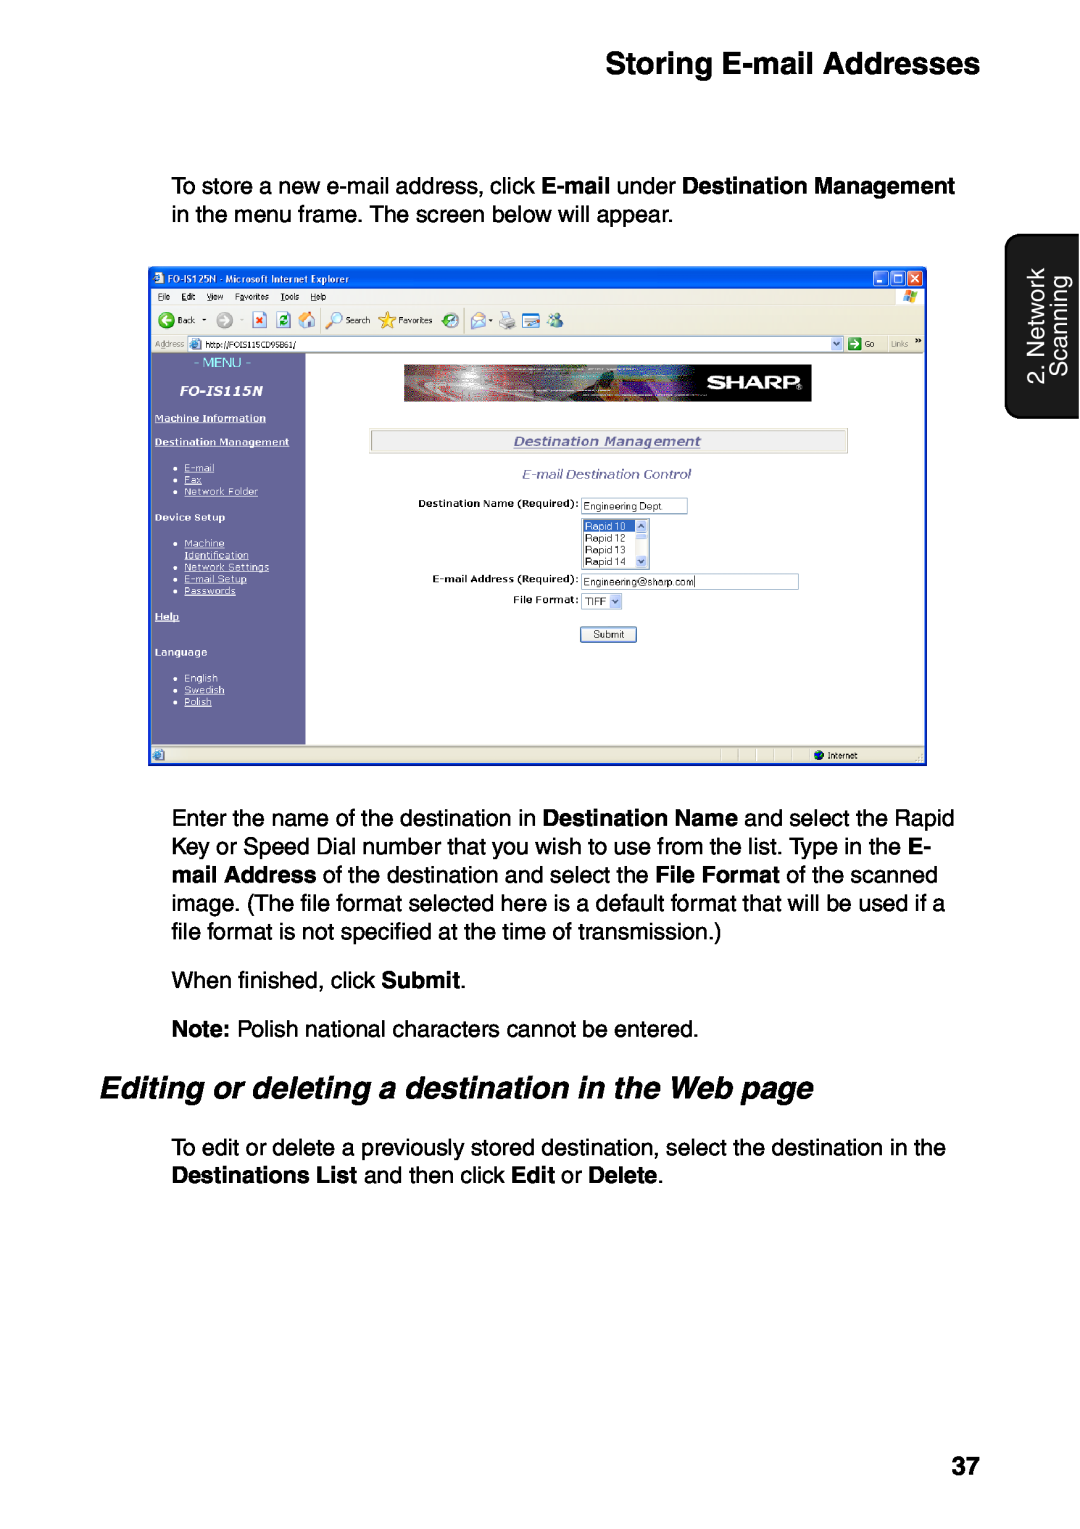 Sharp FO-IS115N operation manual Editing or deleting a destination in the Web page, Network Scanning 